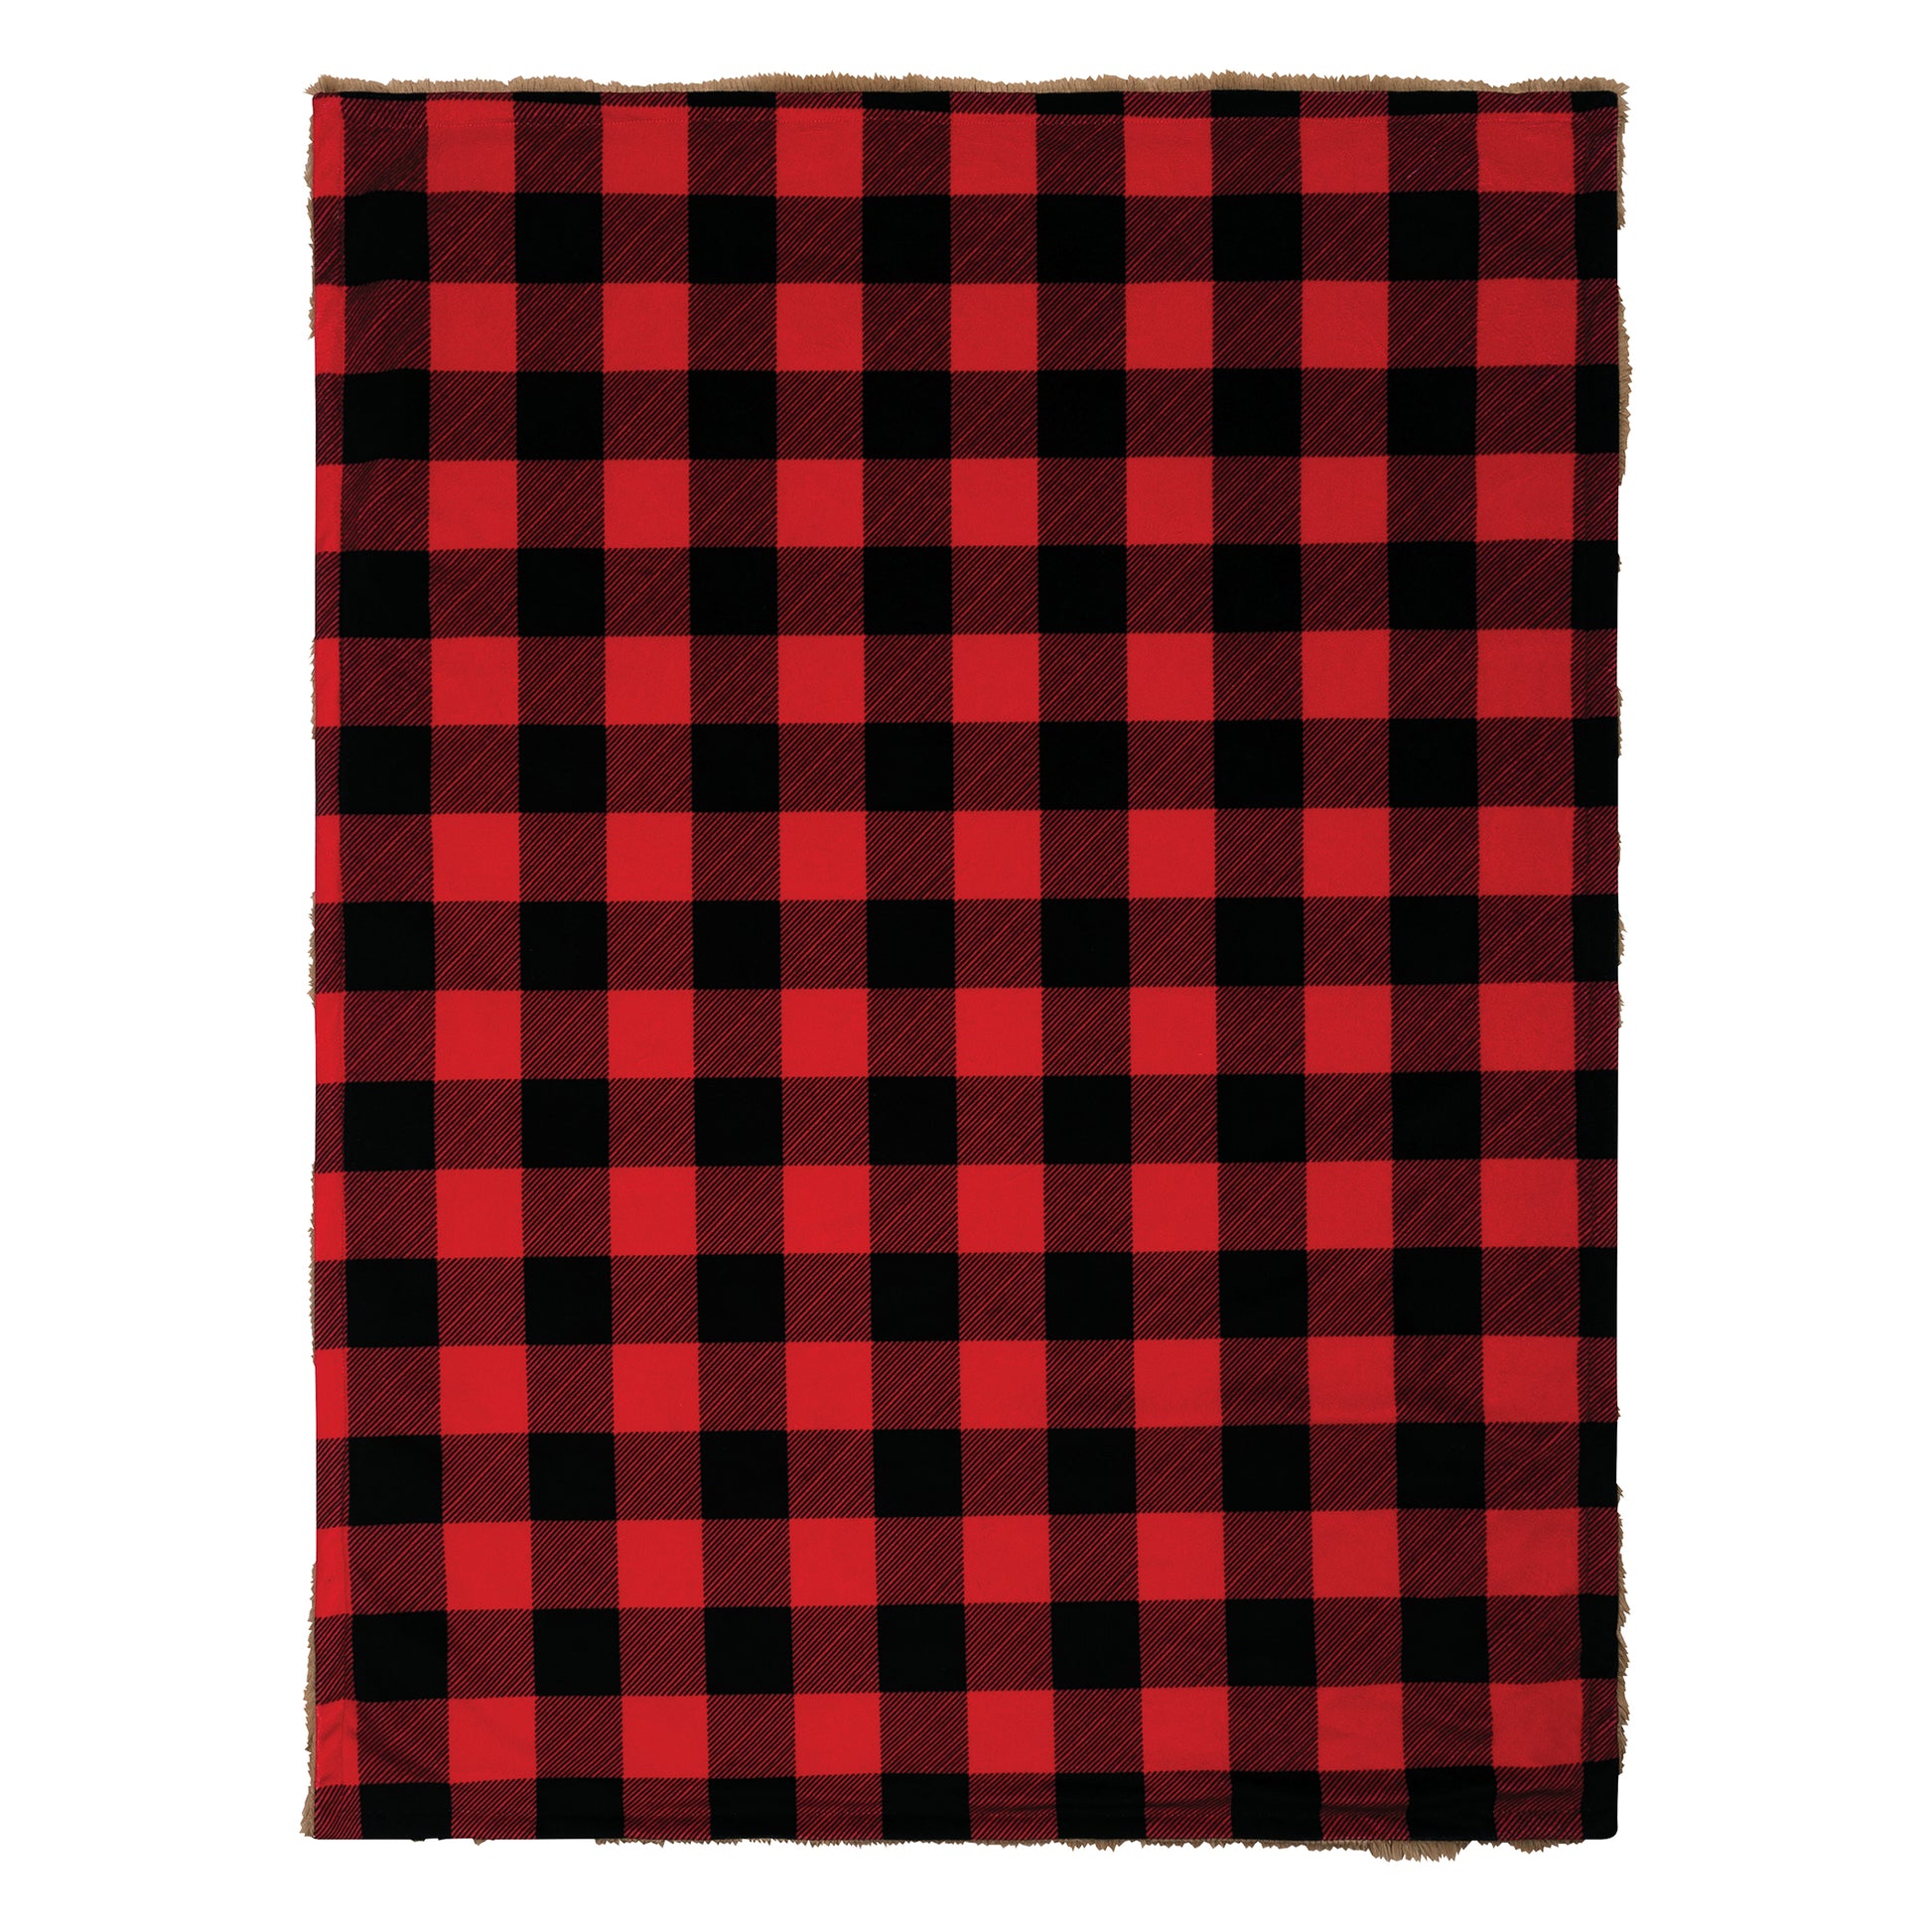  Buffalo Check Plush Baby Blanket - laid out view